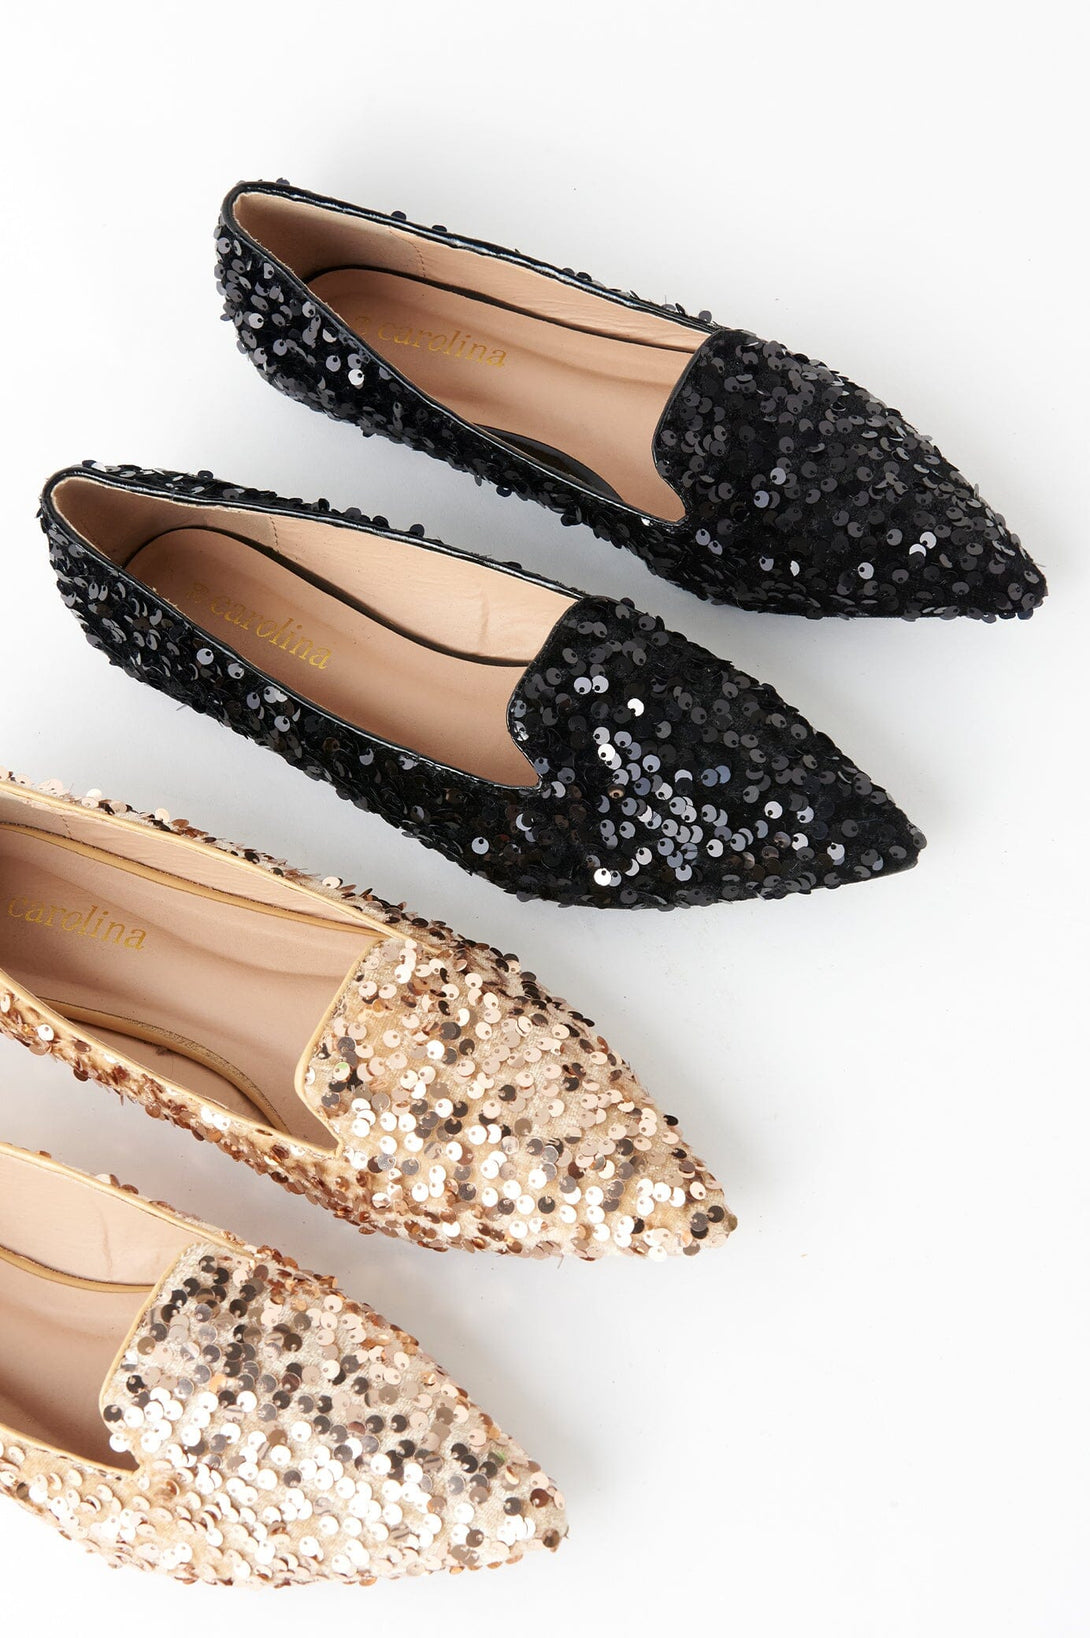 Annabelle Sequin Loafers Black- Pre Order Shoes